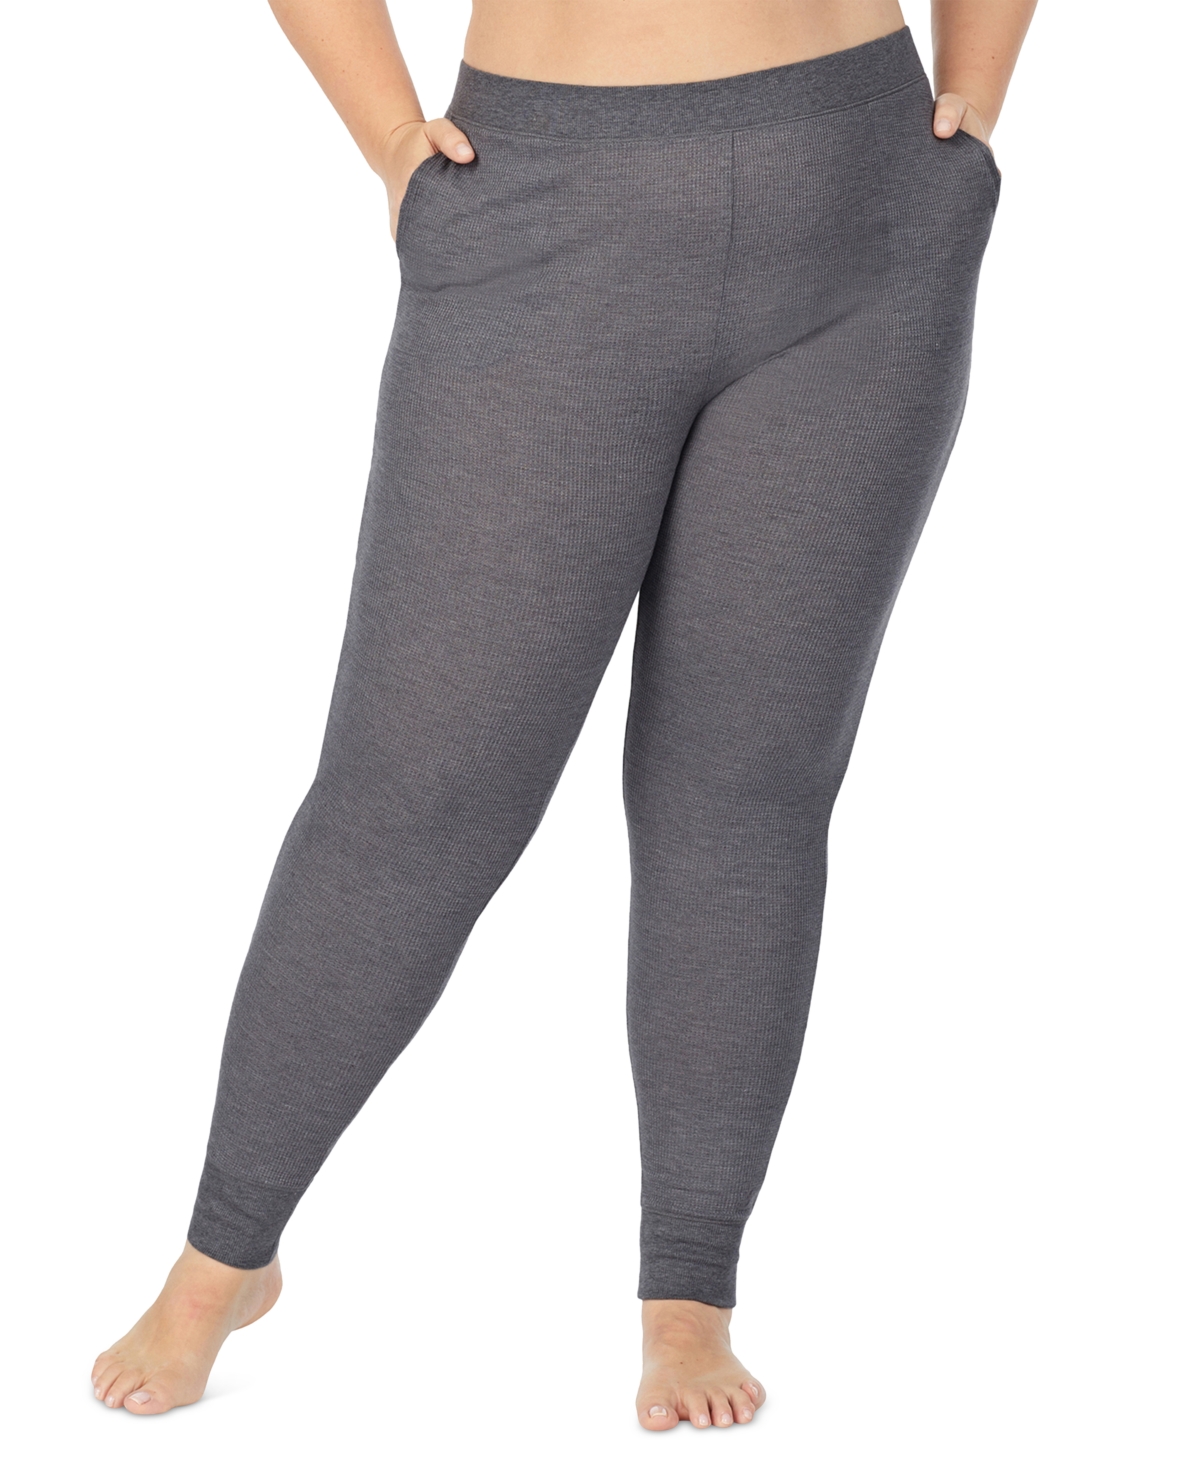 Cuddl Duds Plus Size Softwear With Stretch High Waisted Leggings In Ivory